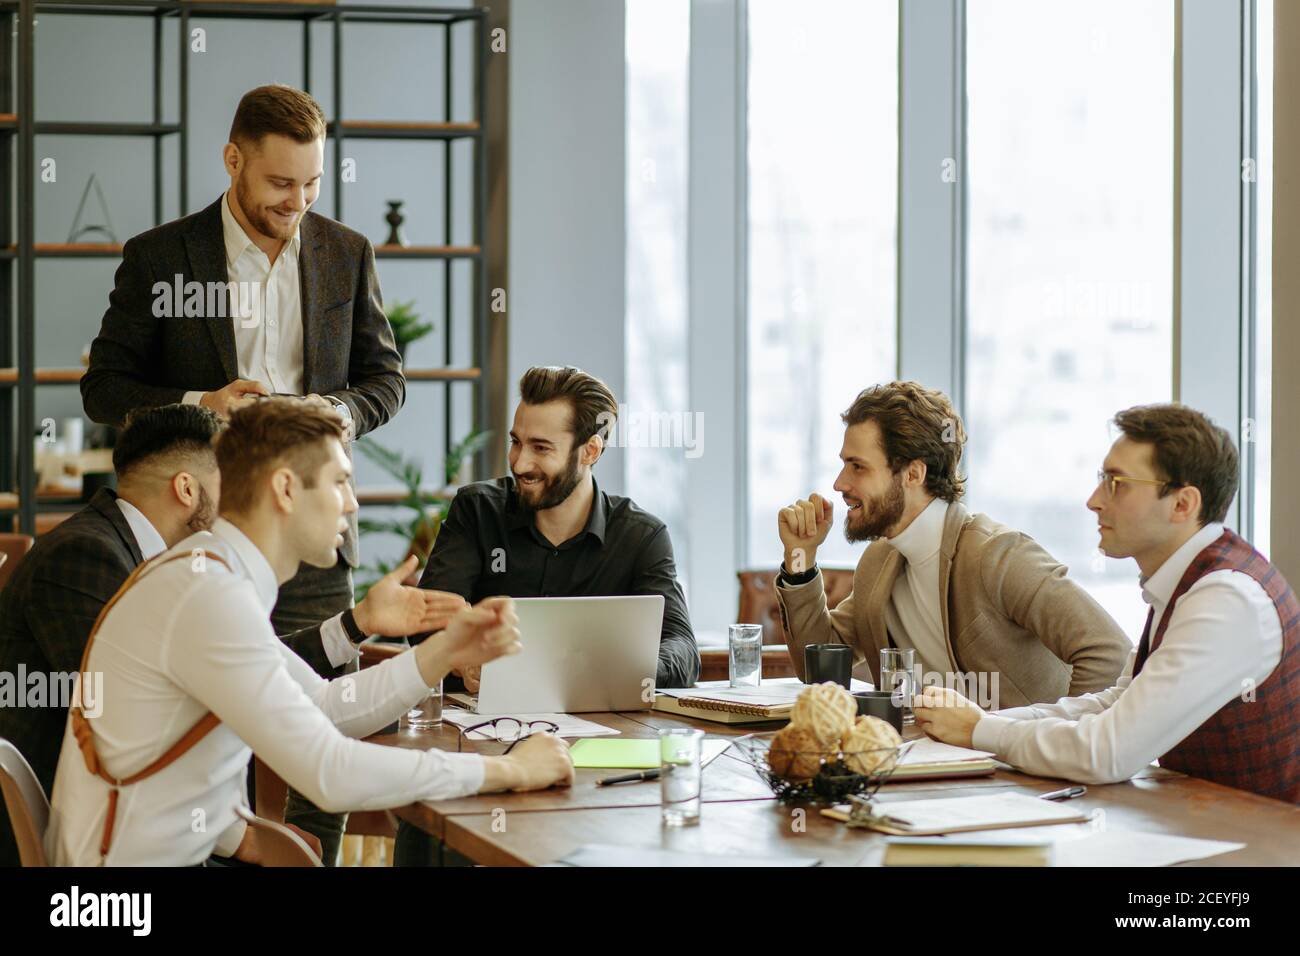 leisure time at work of business crew consisted of young men leaders in elegant suits, happy business partners or colleagues after successful conferen Stock Photo